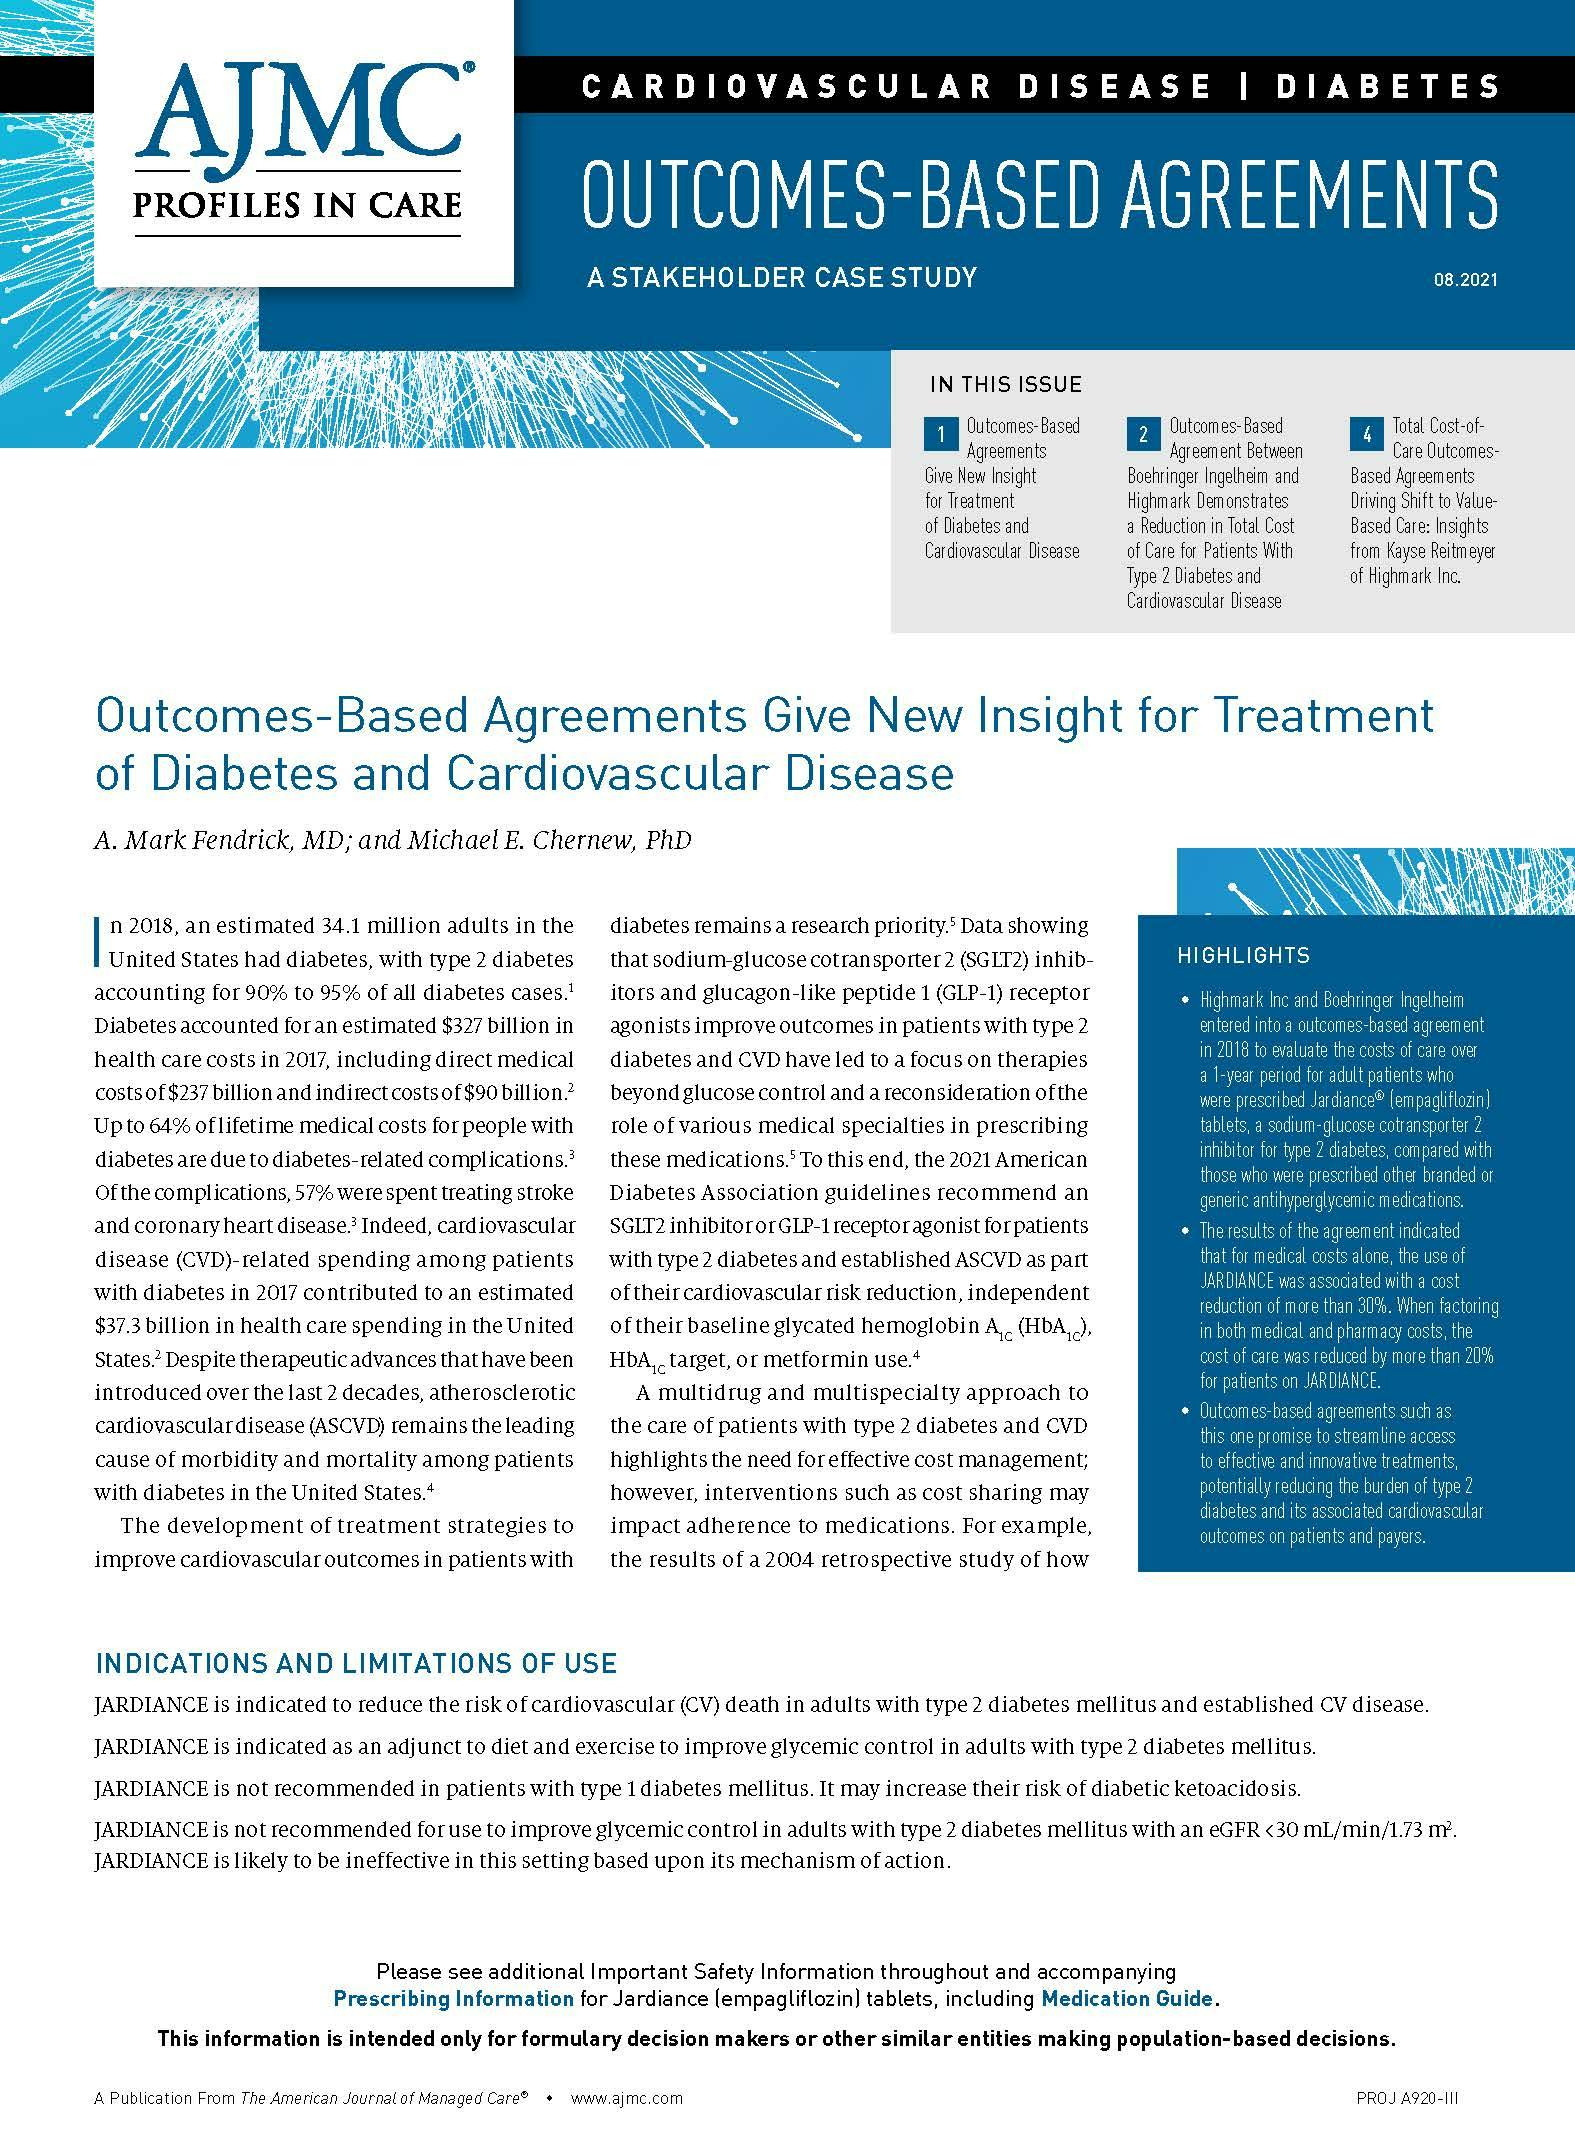 Outcomes-Based Agreements Give New Insight for Treatment of Diabetes and Cardiovascular Disease